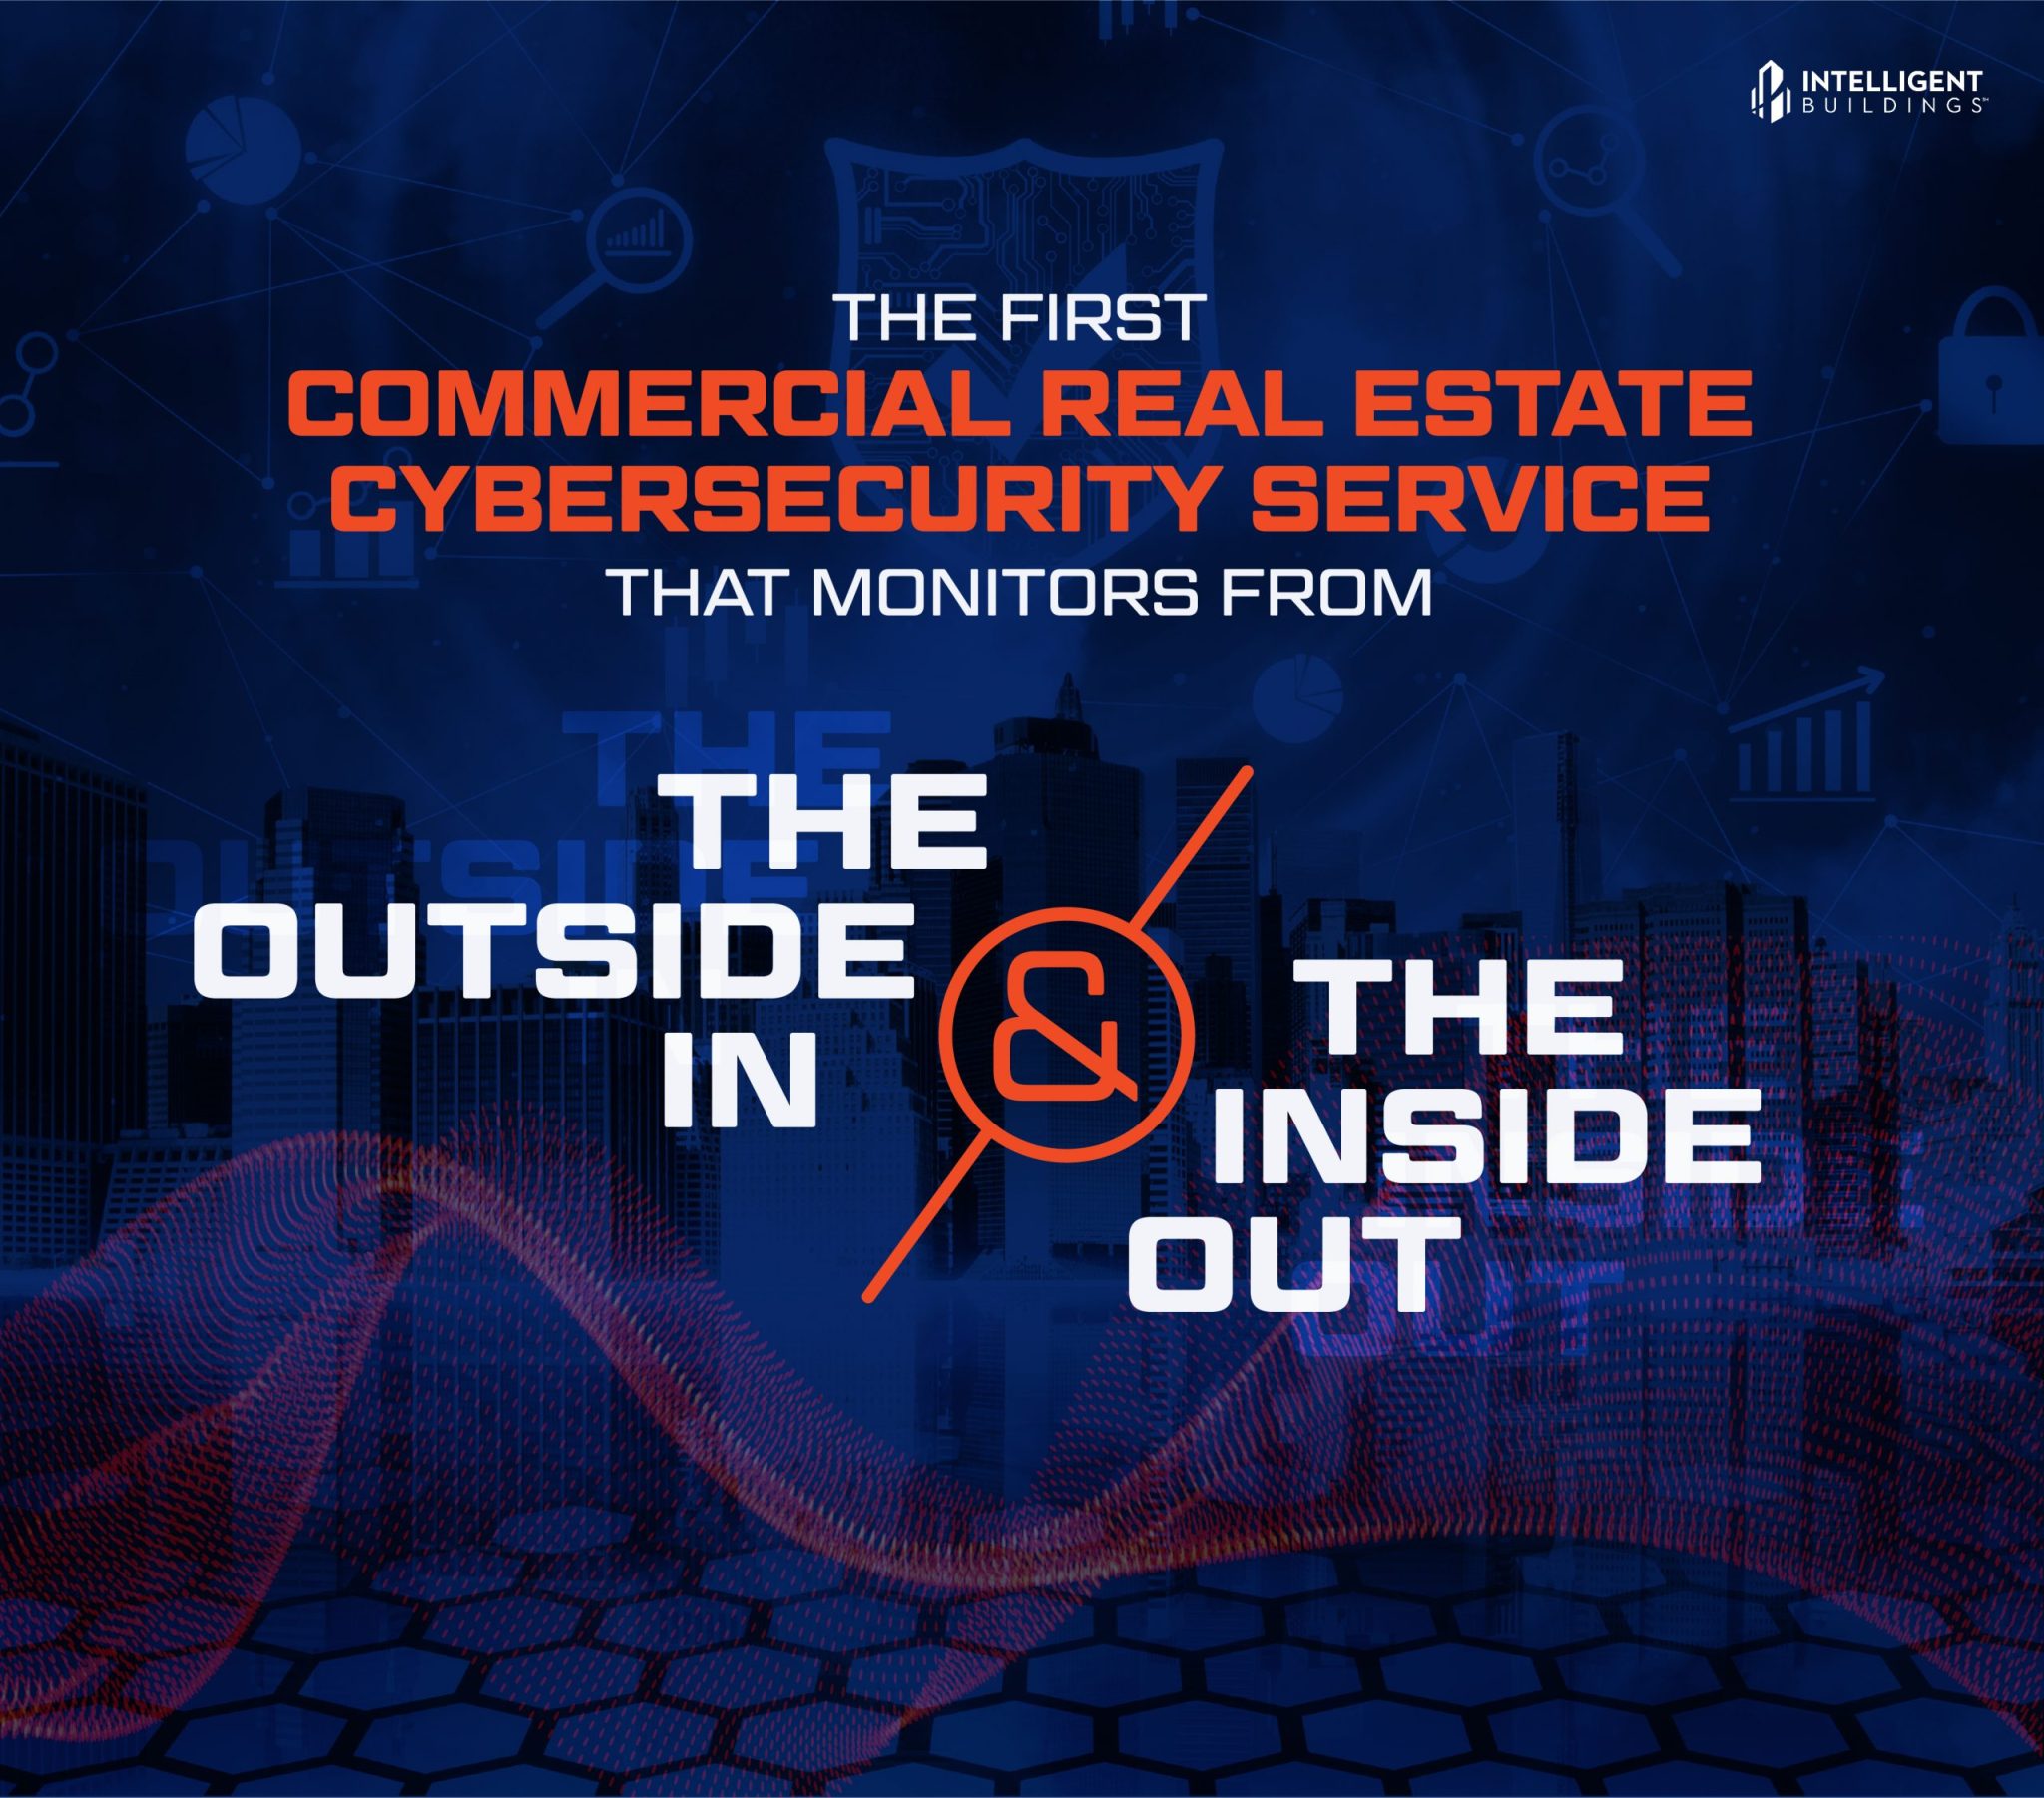 The First Commercial Real Estate Cybersecurity Service That Not Only Monitors From The Outside In But Also The Inside Out